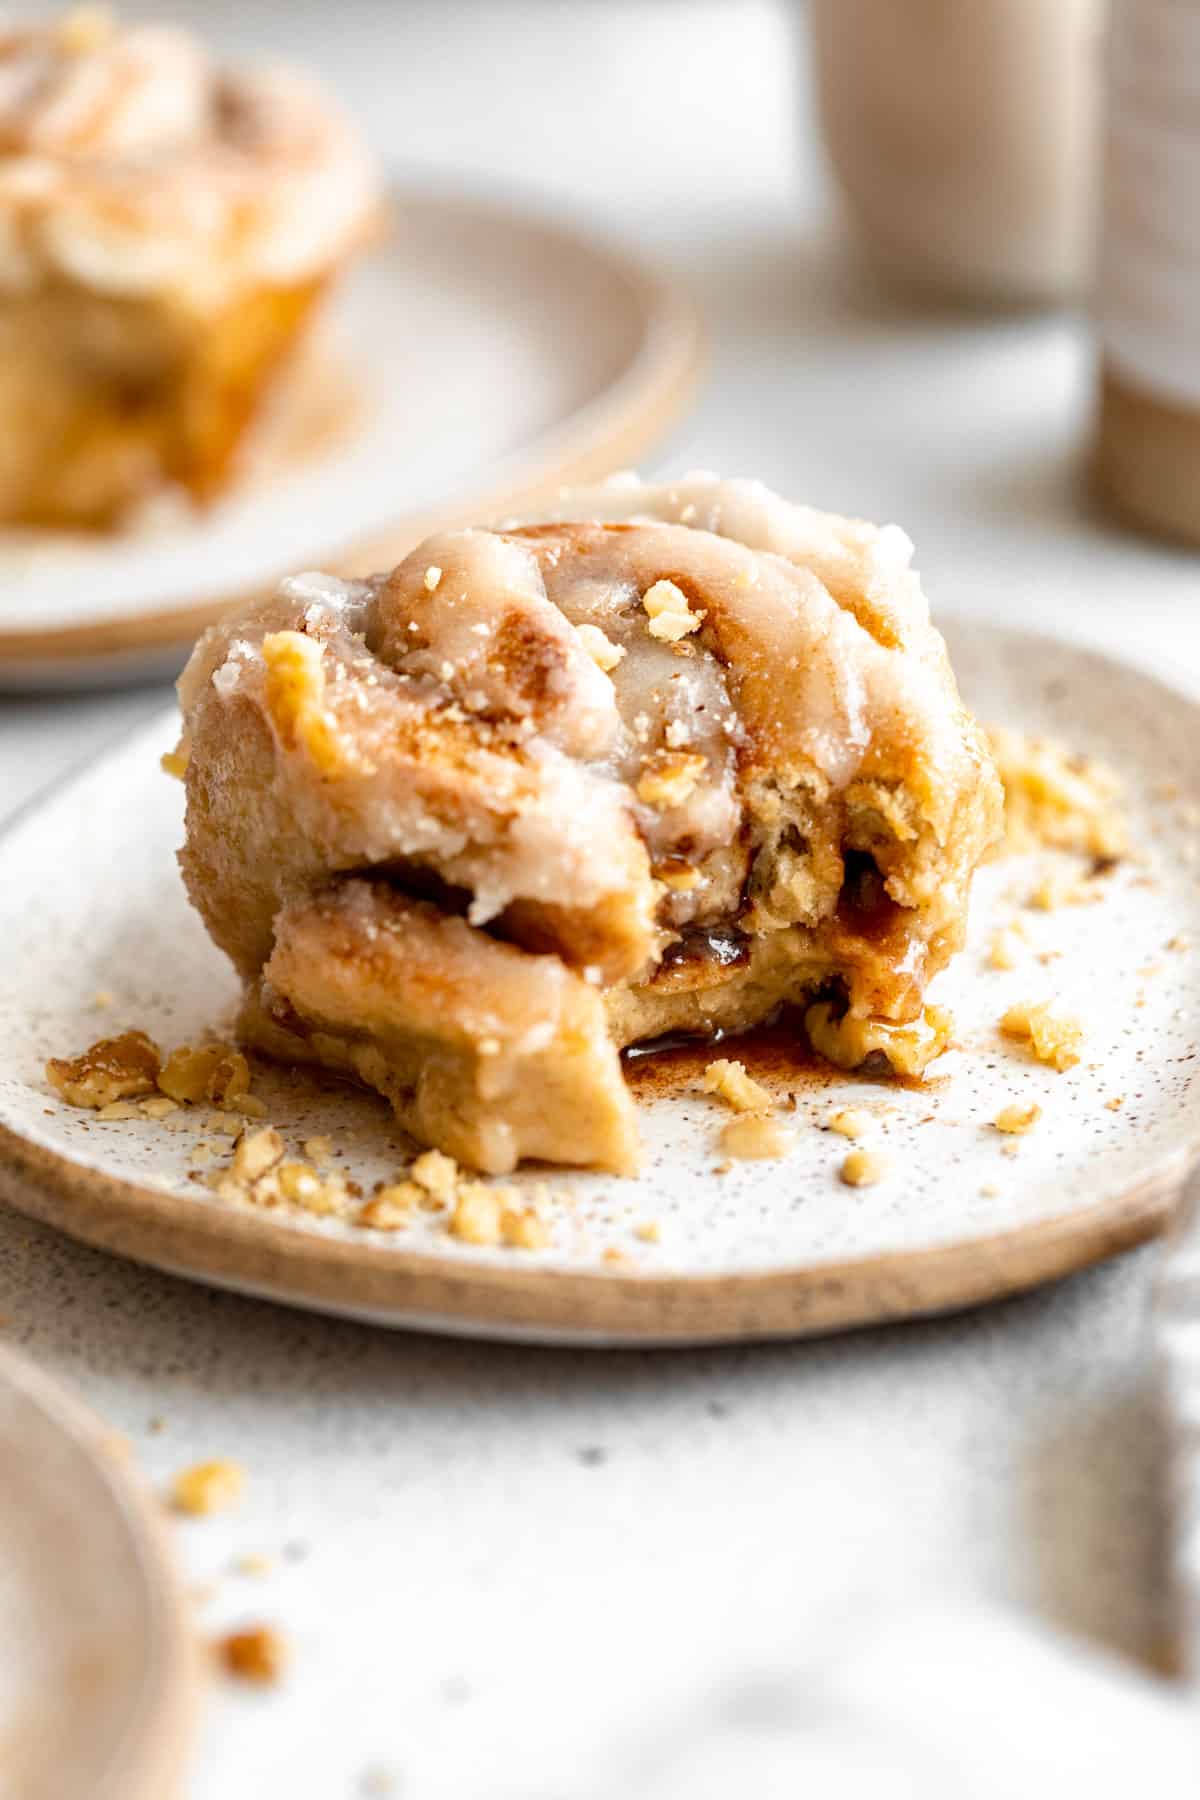 gluten free cinnamon rolls on a plate with a bite taken out